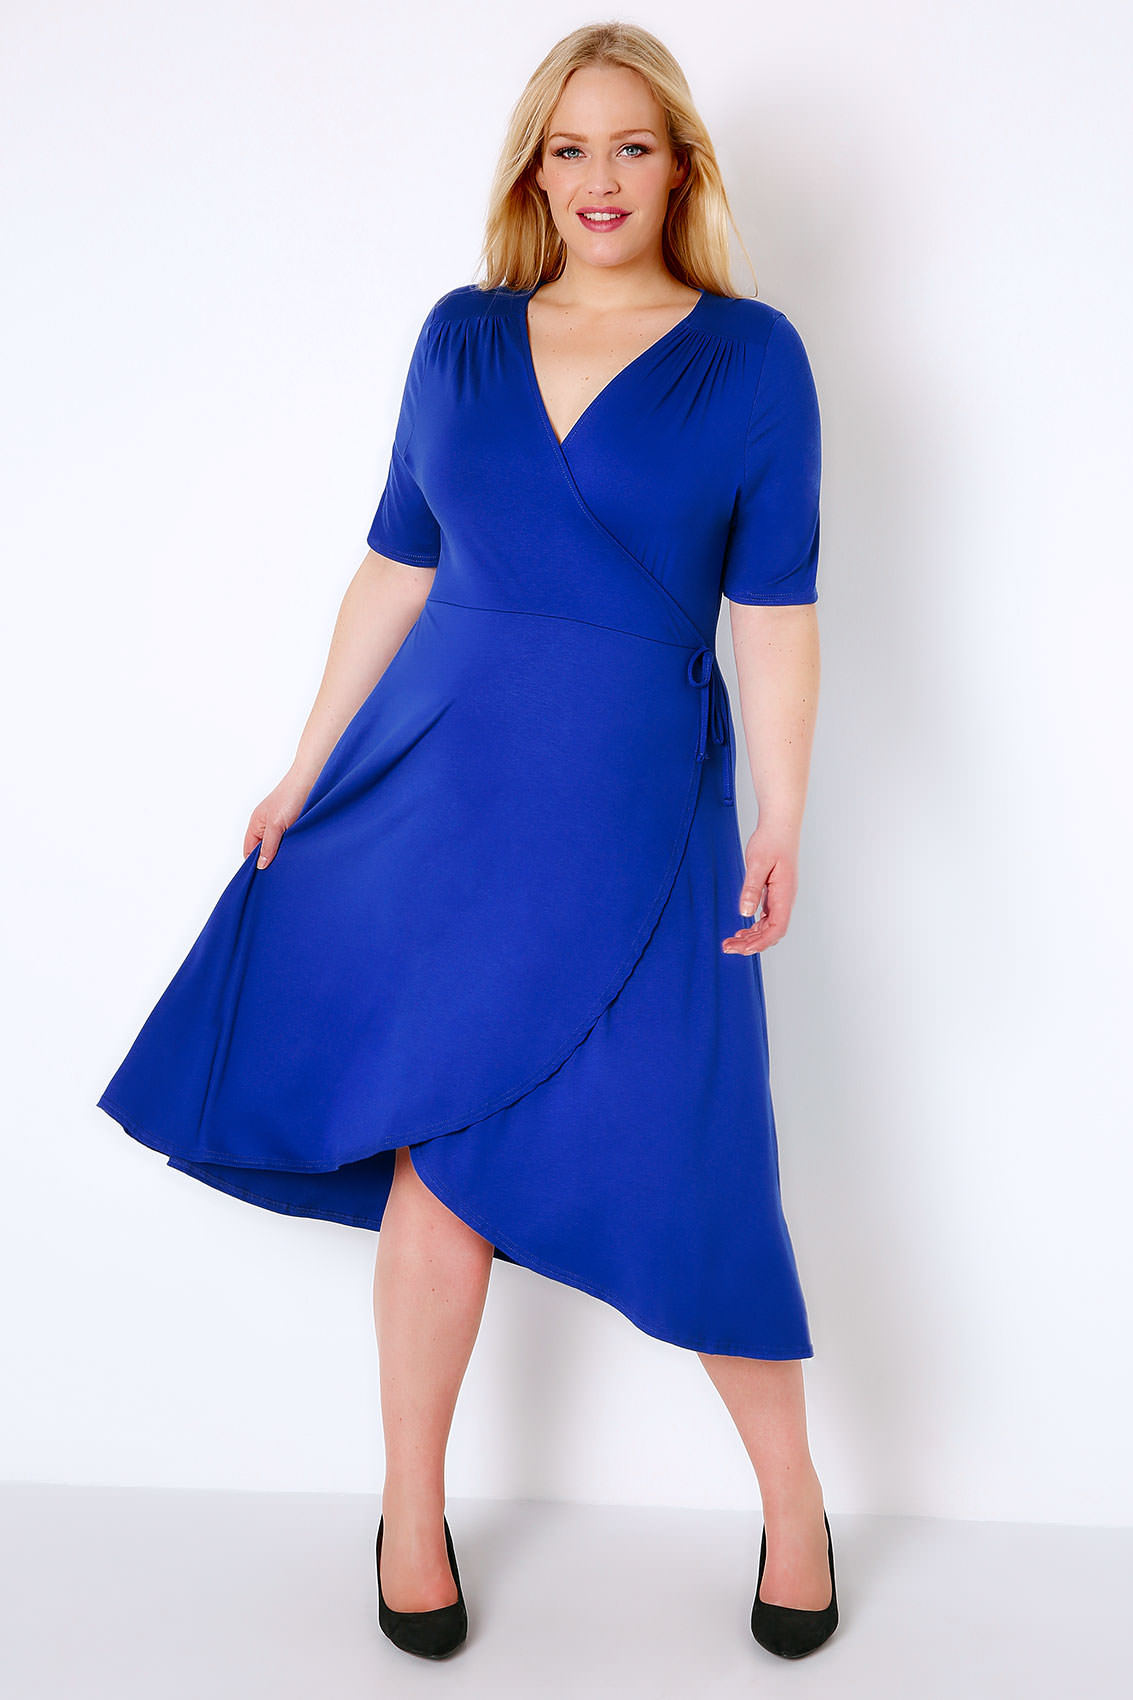 Royal Blue Wrap Dress With Short Sleeves, Plus size 16 to 32